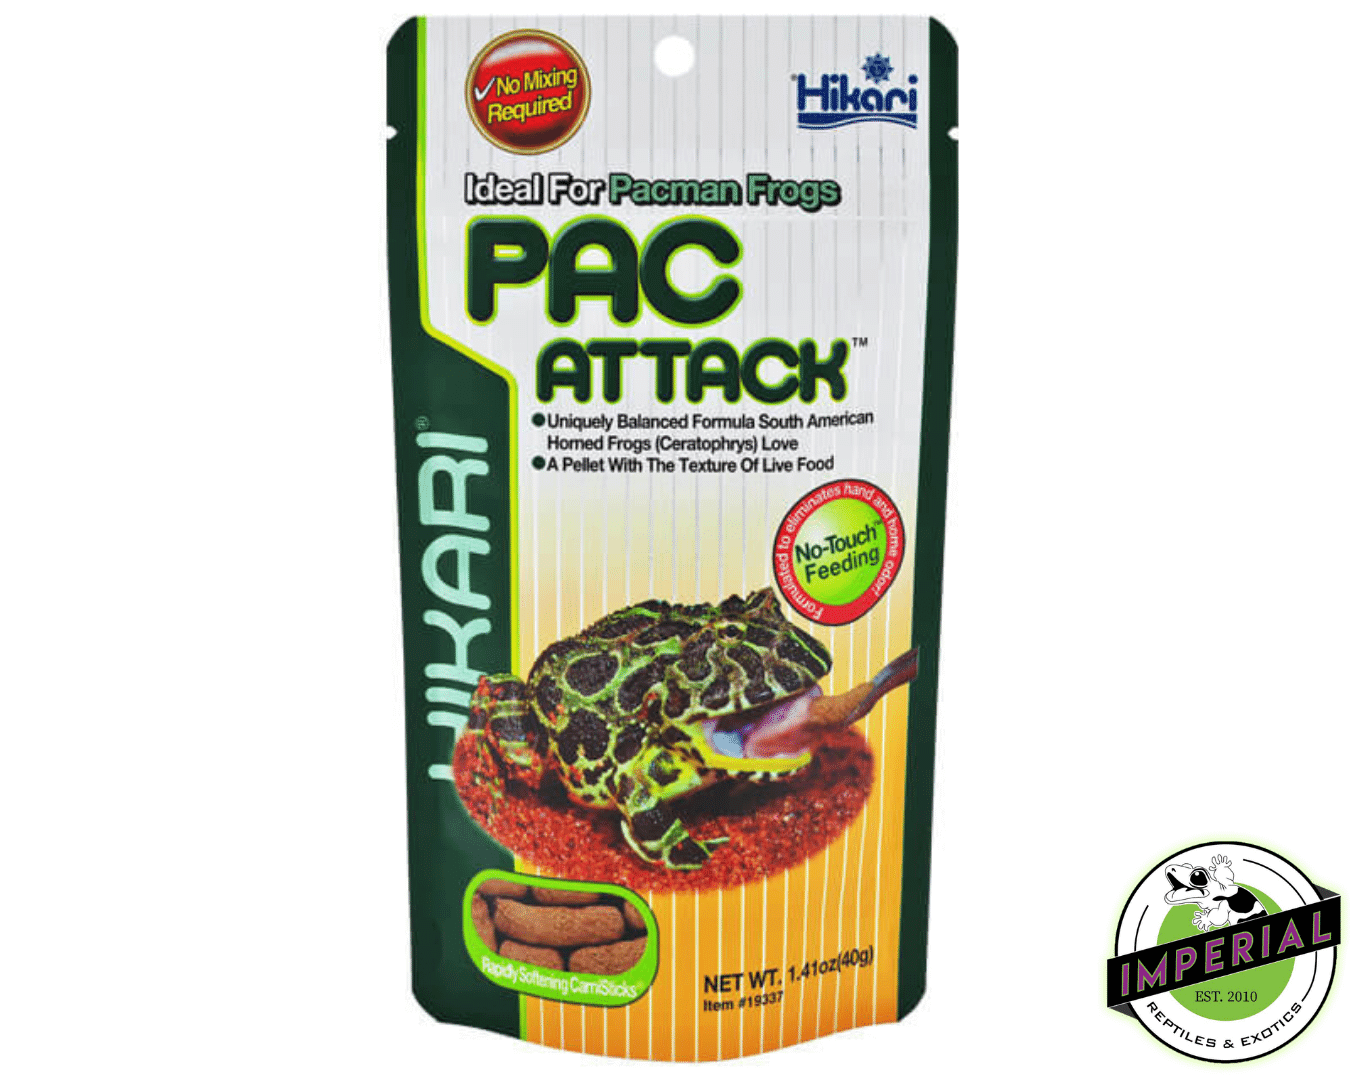 hikari pacman frog pac attack food for frogs for sale online, buy reptile supplies near me at cheap prices